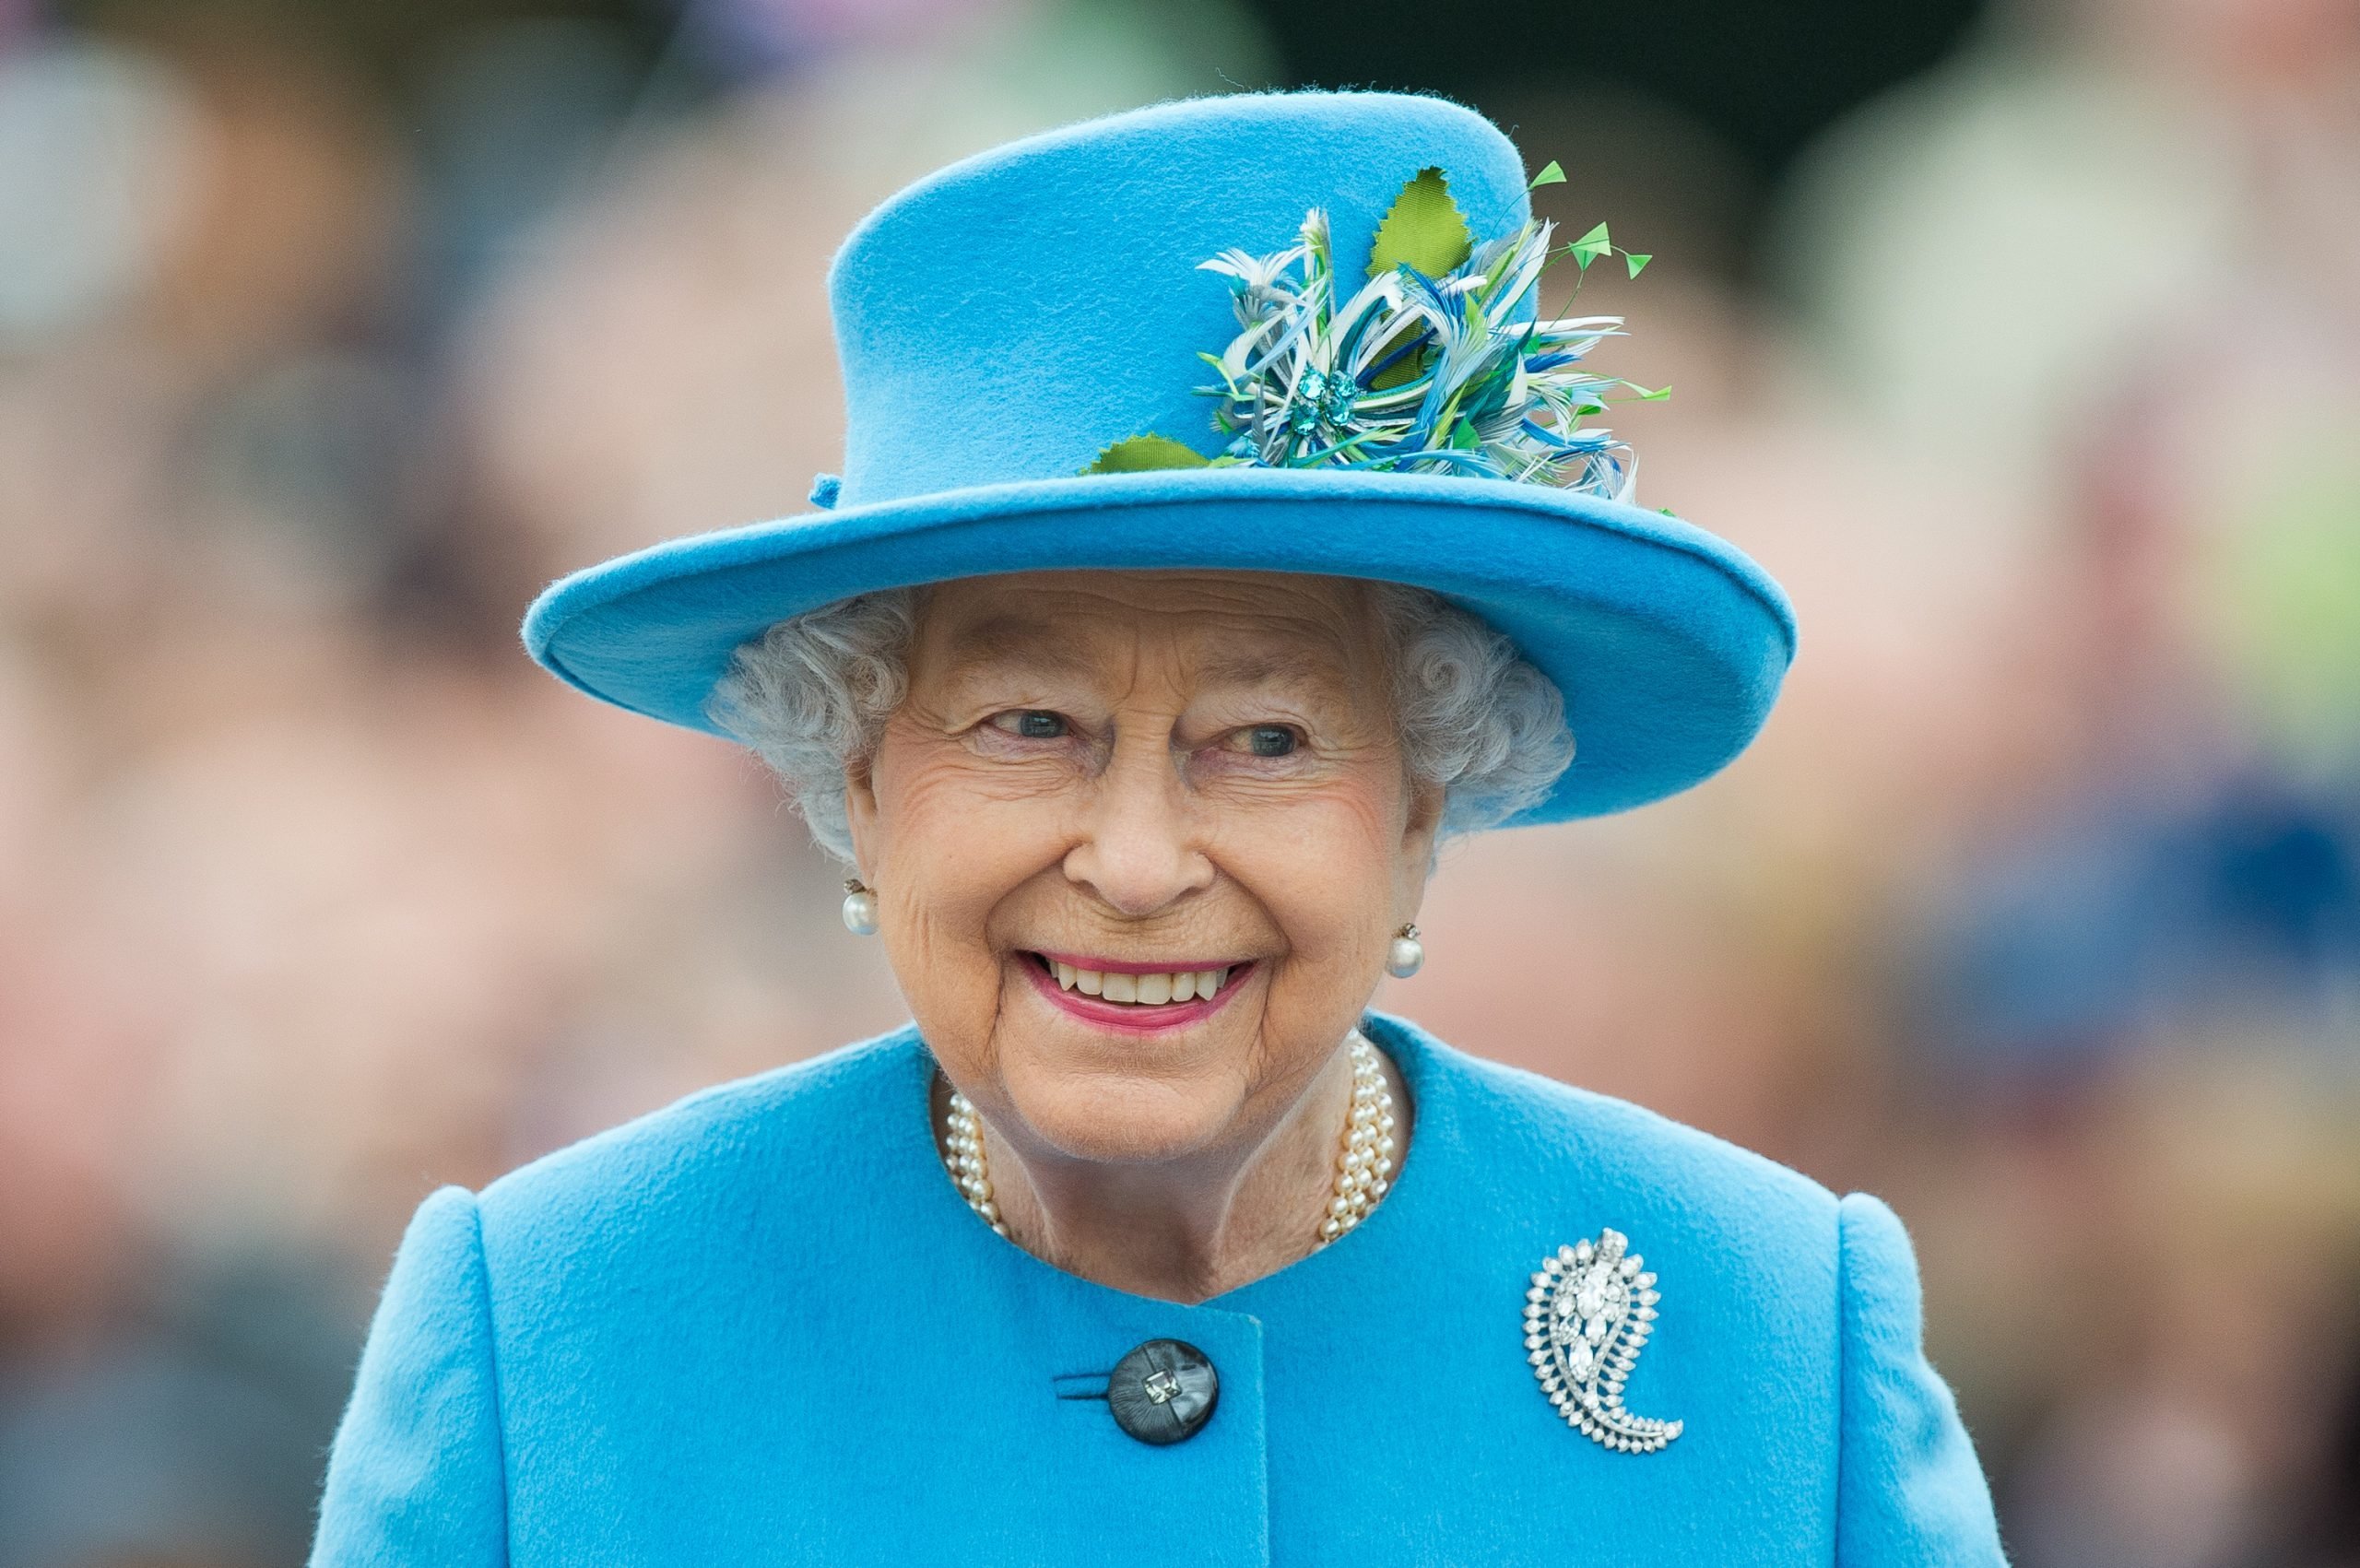 Queen Elizabeth II's Royal Funeral: The Details and Traditions